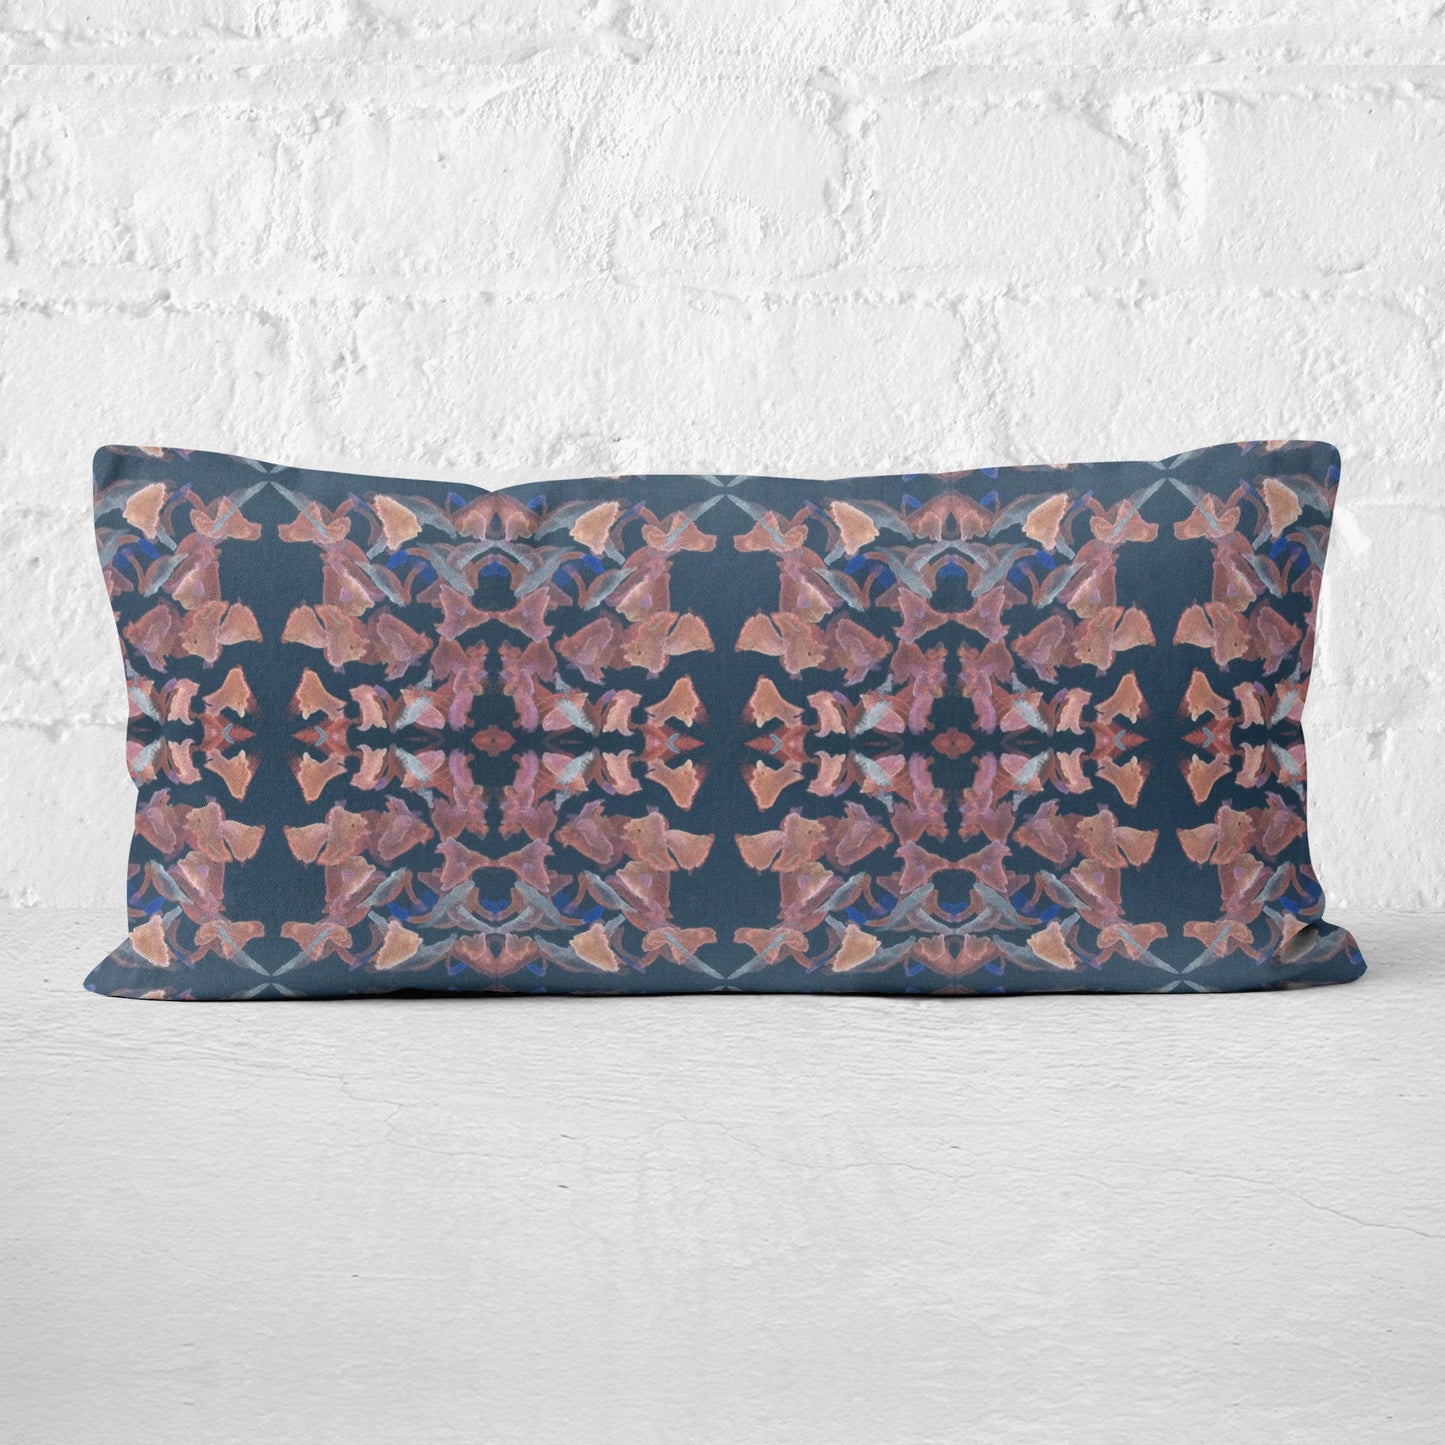 12x24 pillow featuring a hand-painted mauve and gray abstract pattern leaning against a white brick wall.